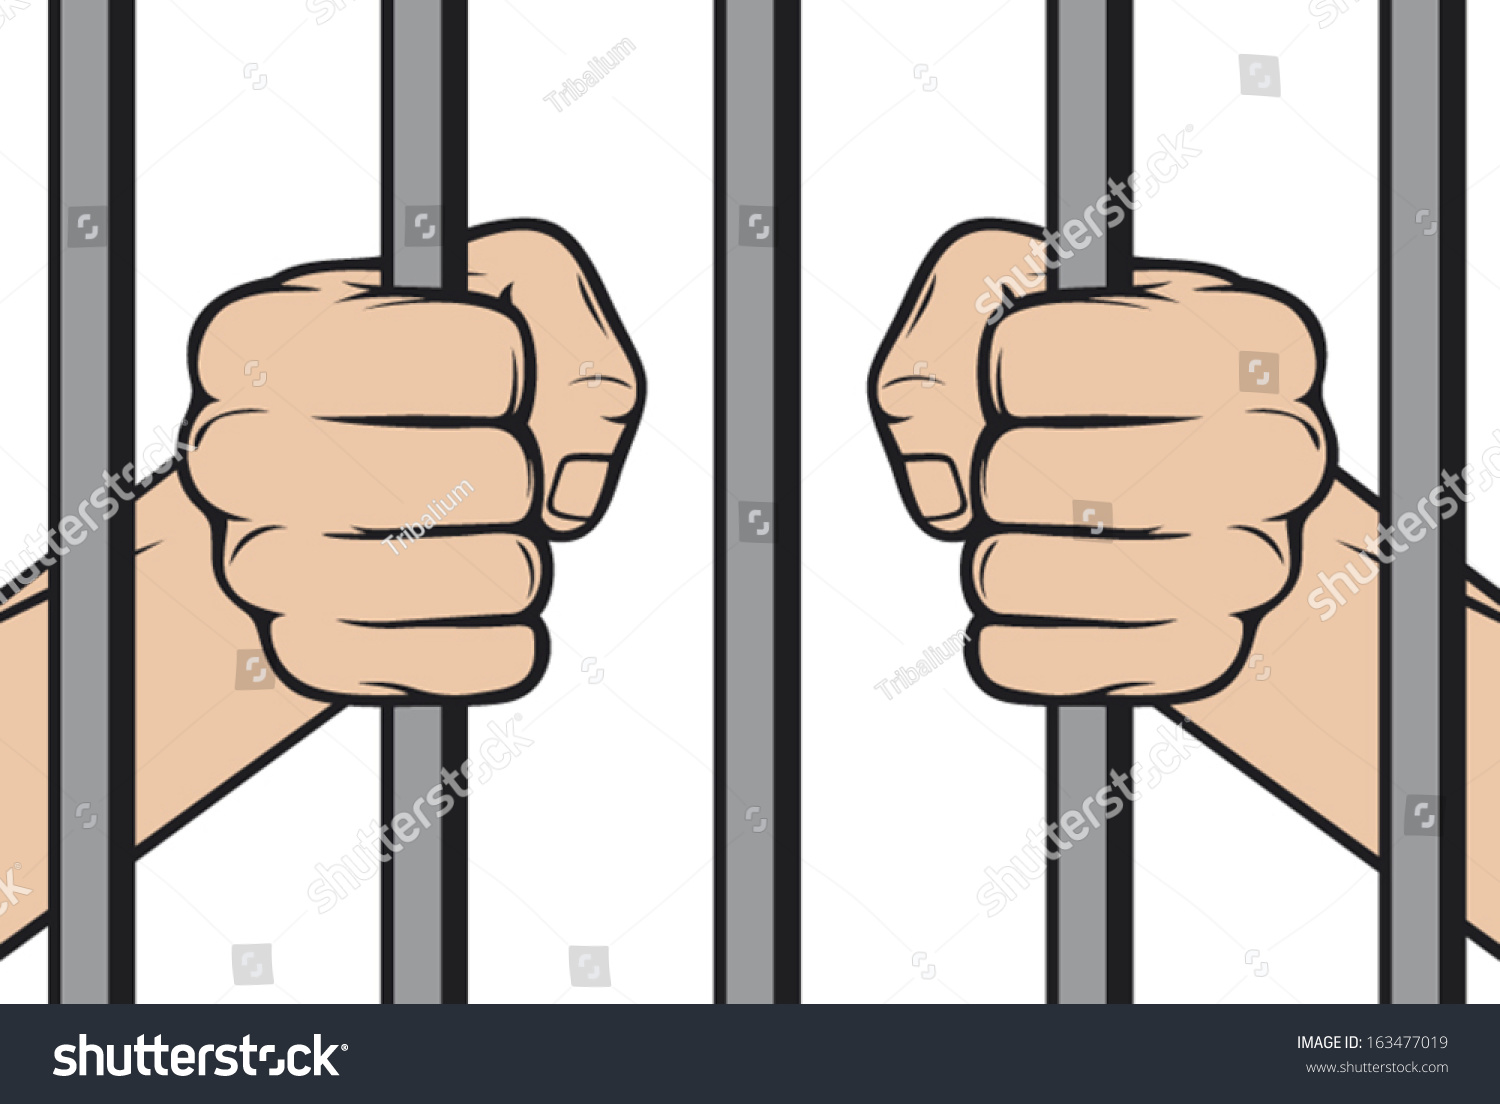 clipart man in jail - photo #20